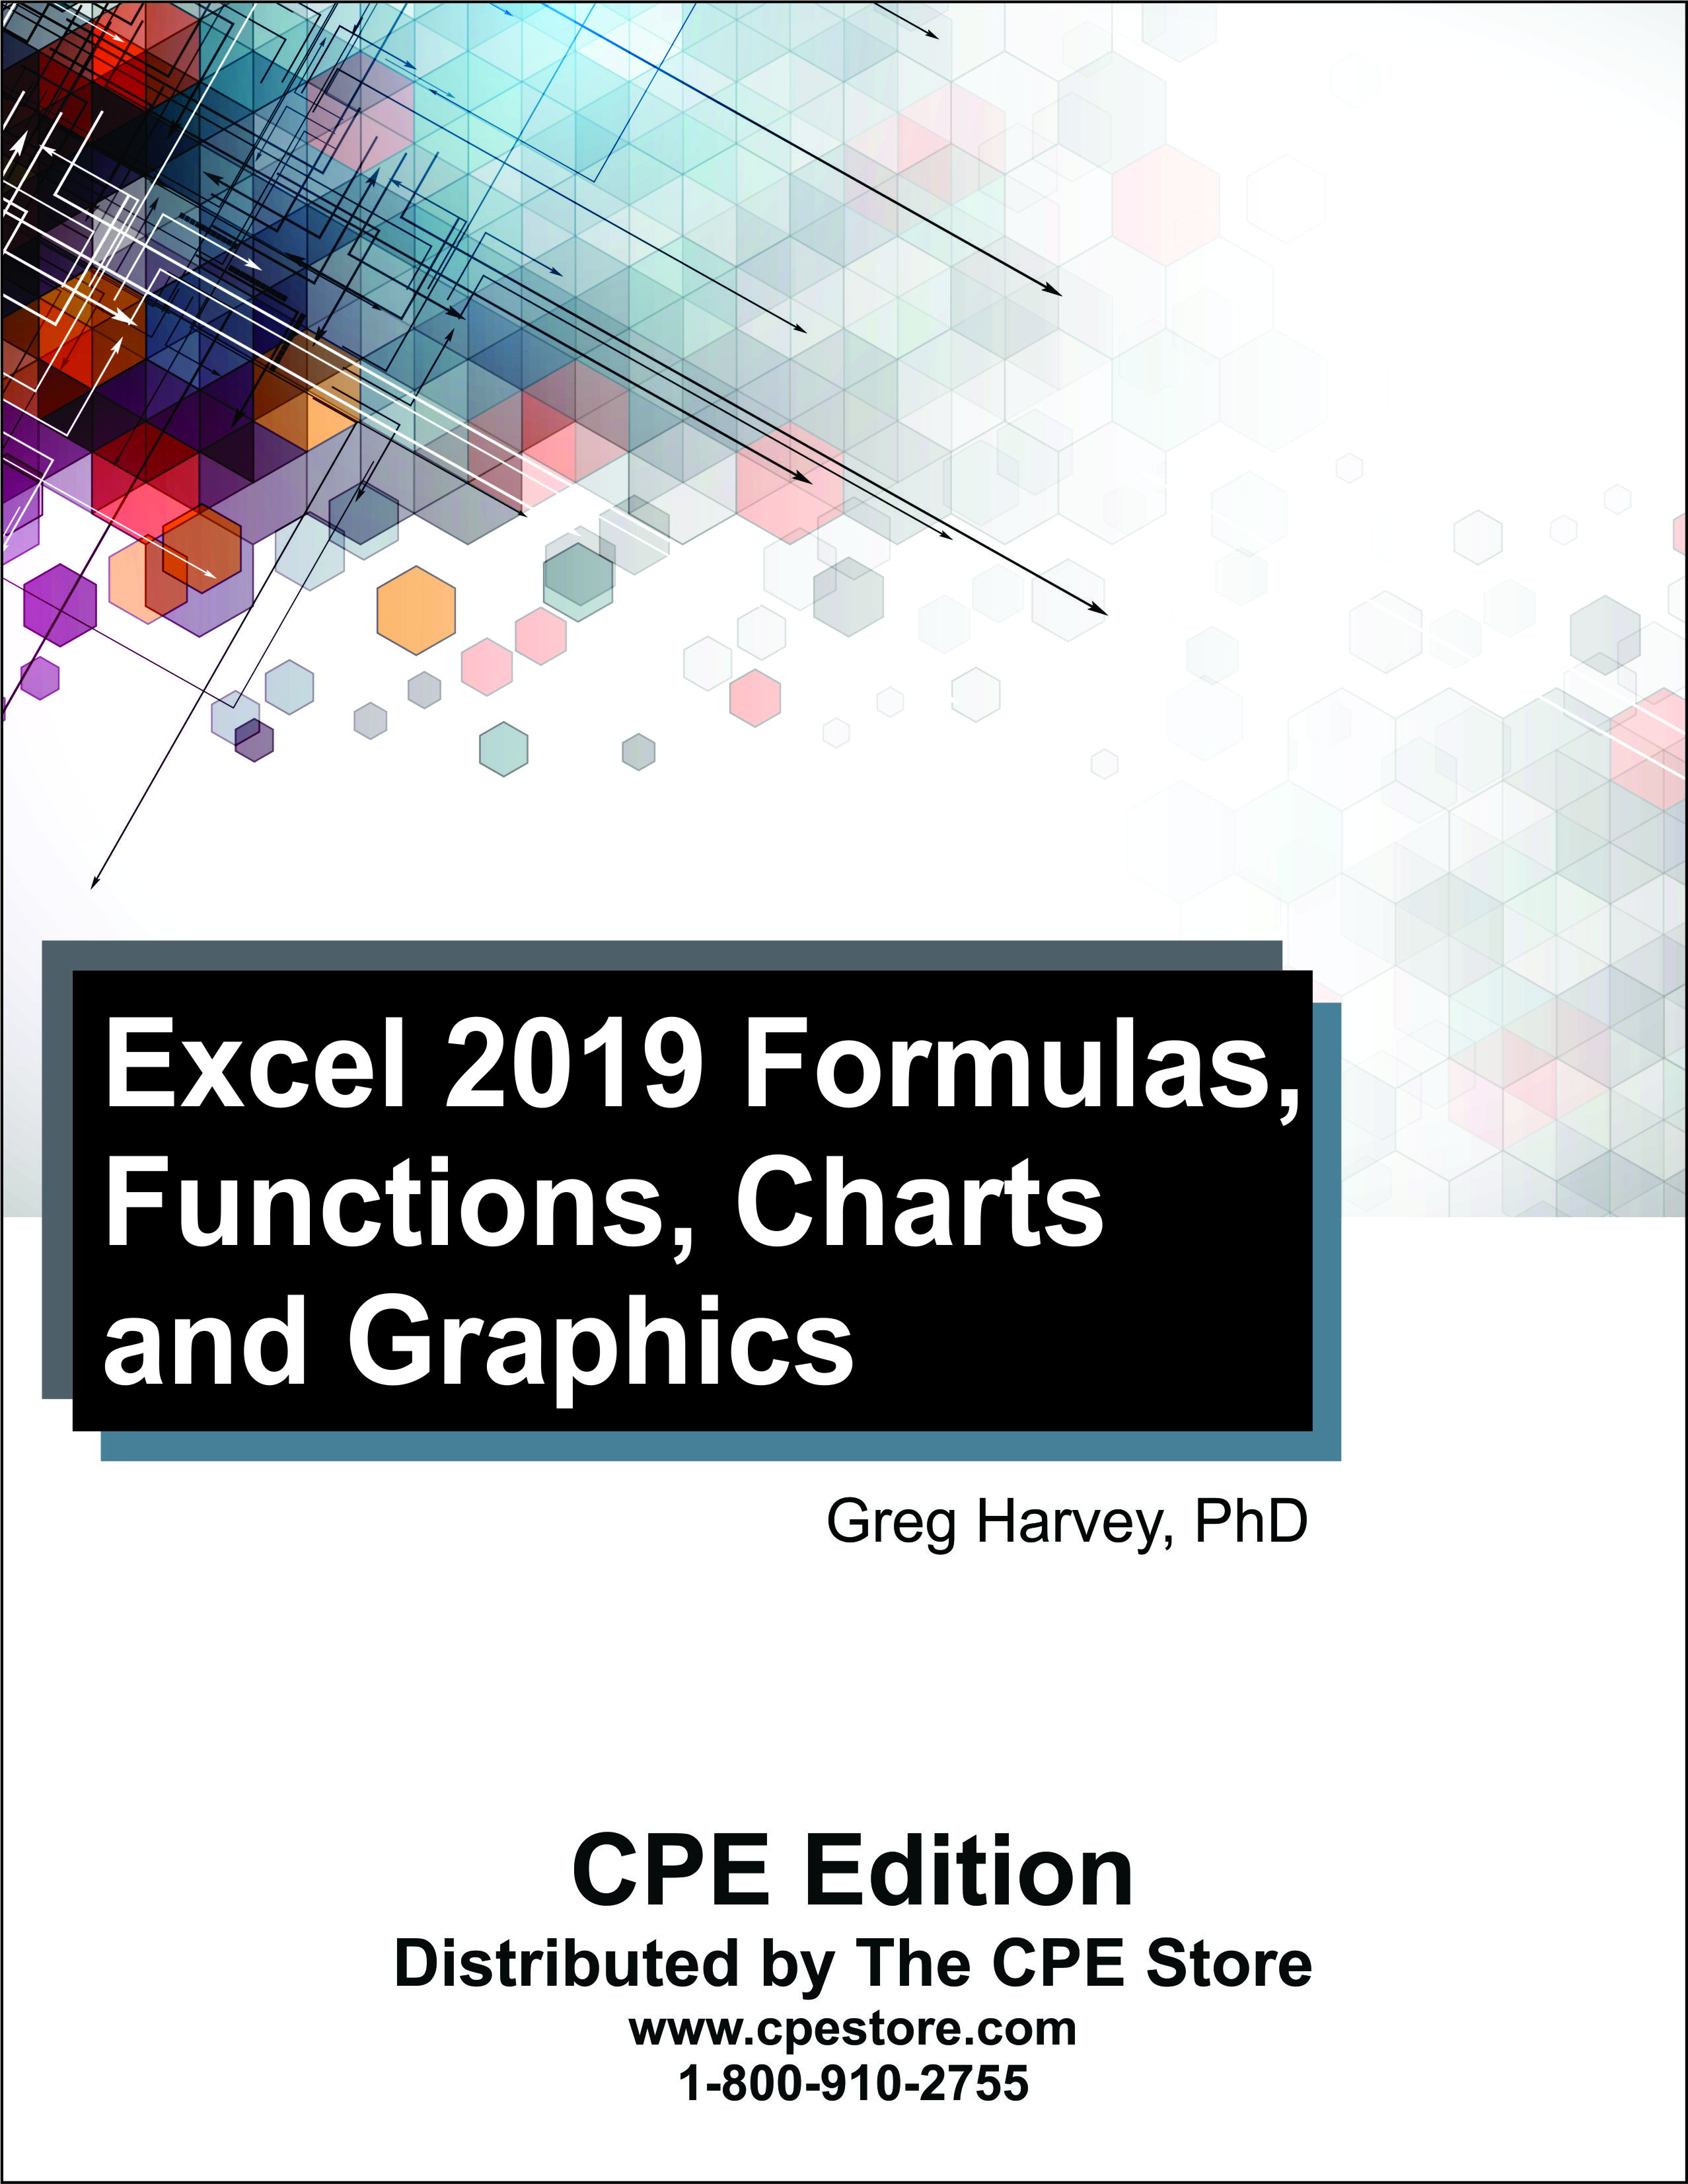 Excel 2019 Formulas, Functions, Charts and Graphics